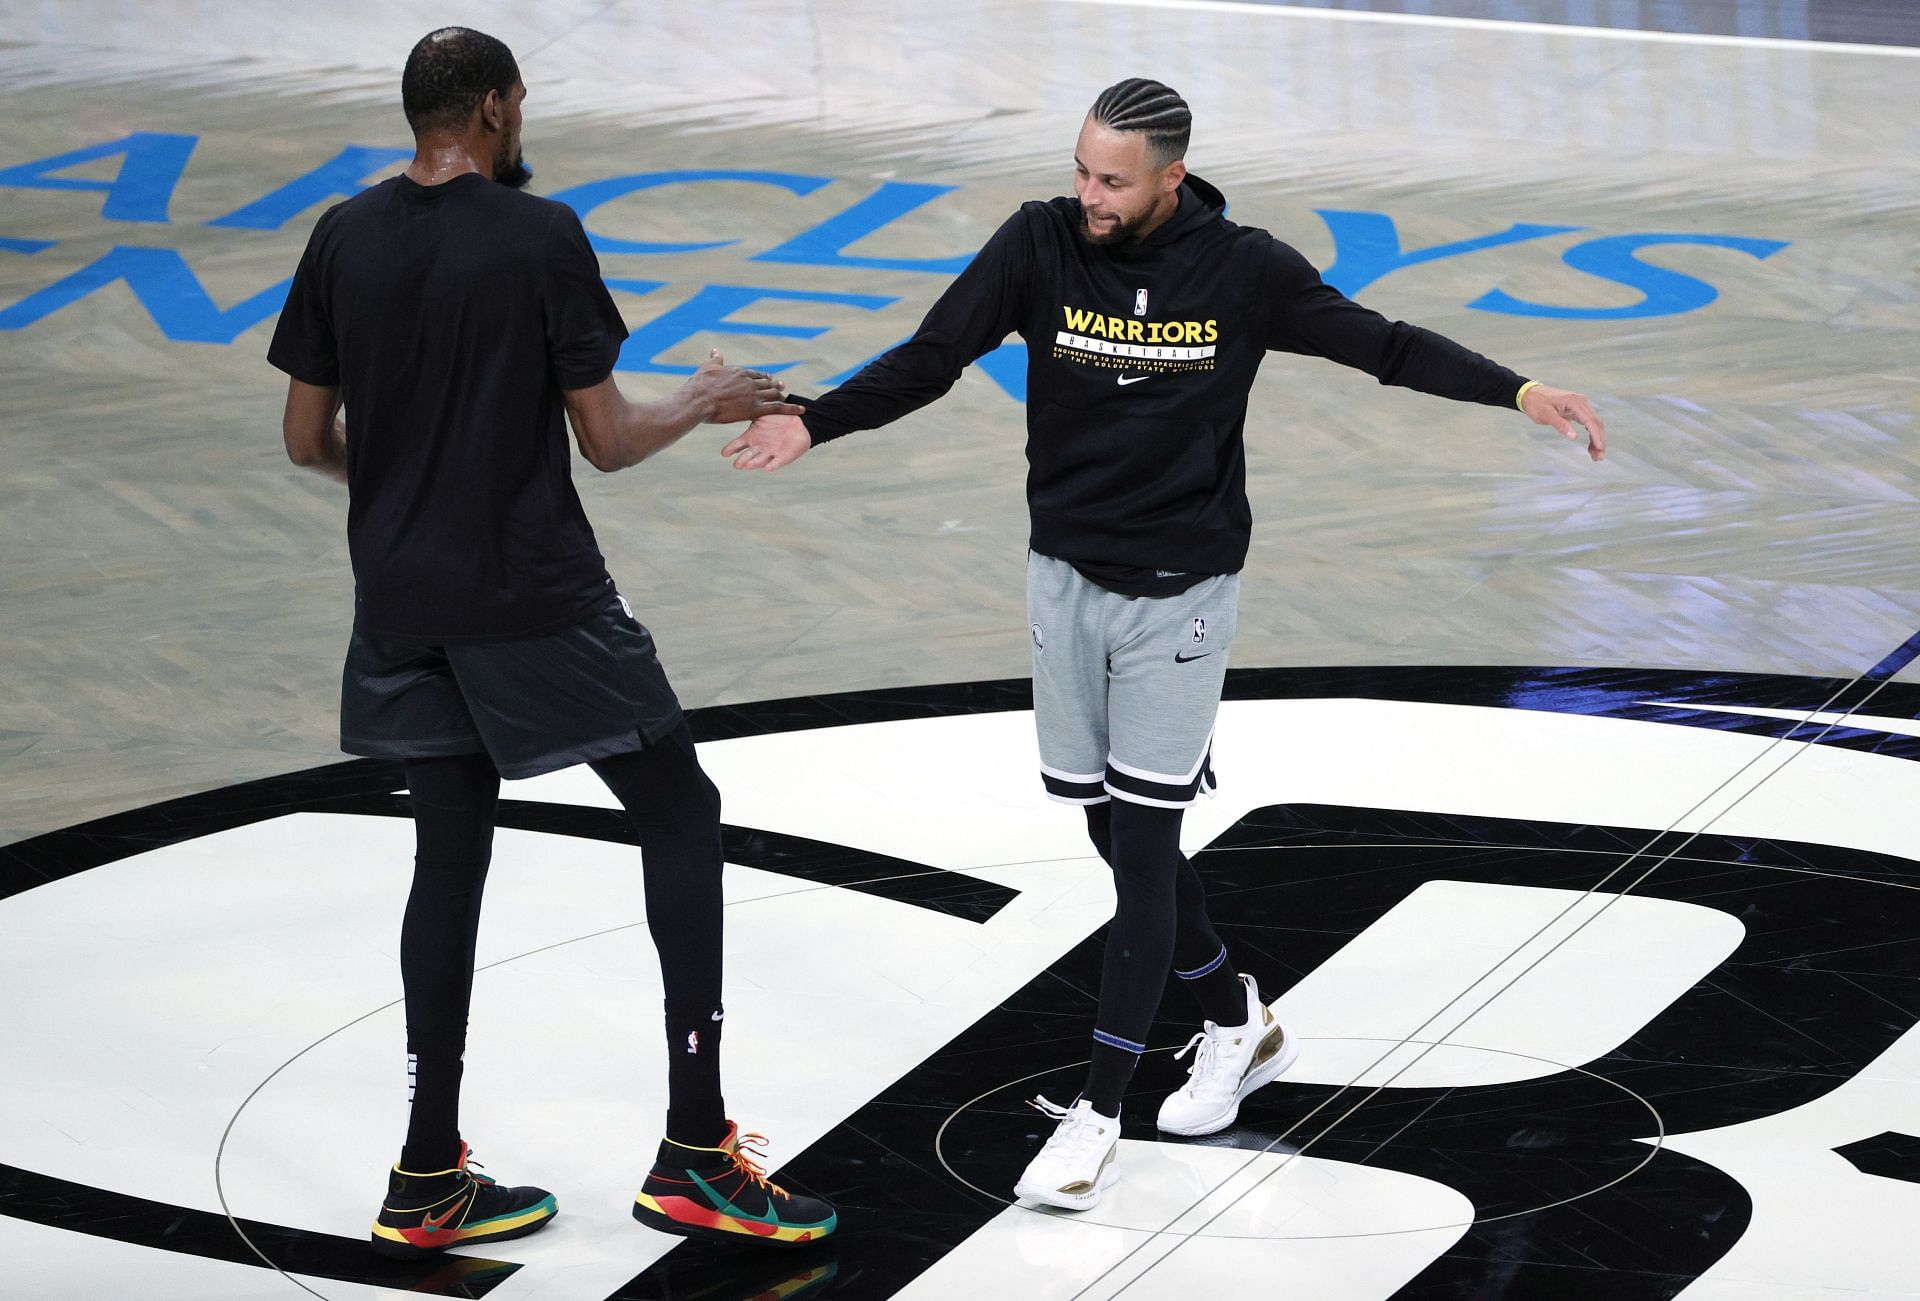 Steph Curry and Kevin Durant greet each other before a game